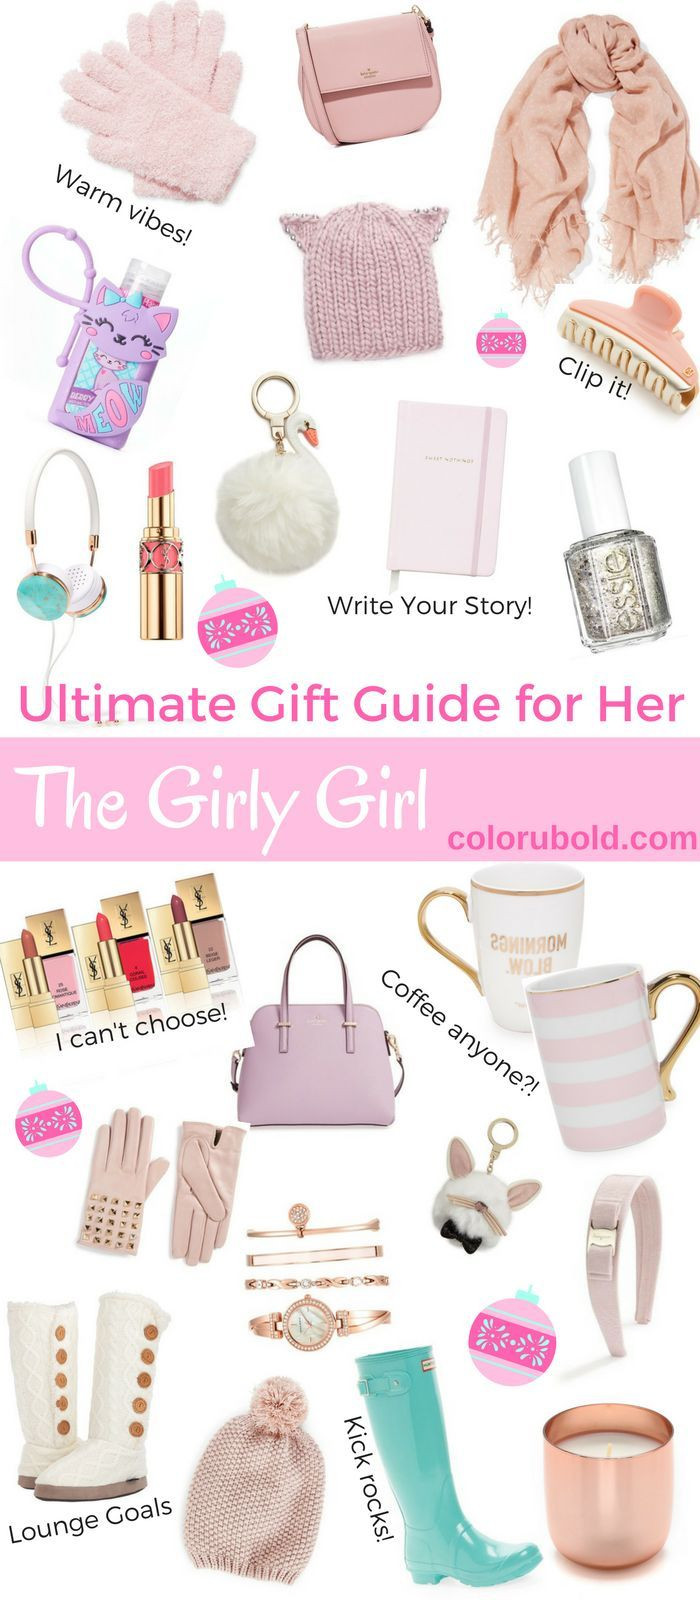 Birthday Gift Ideas For Teens
 The Ultimate Gift Guide for the Girly Girl